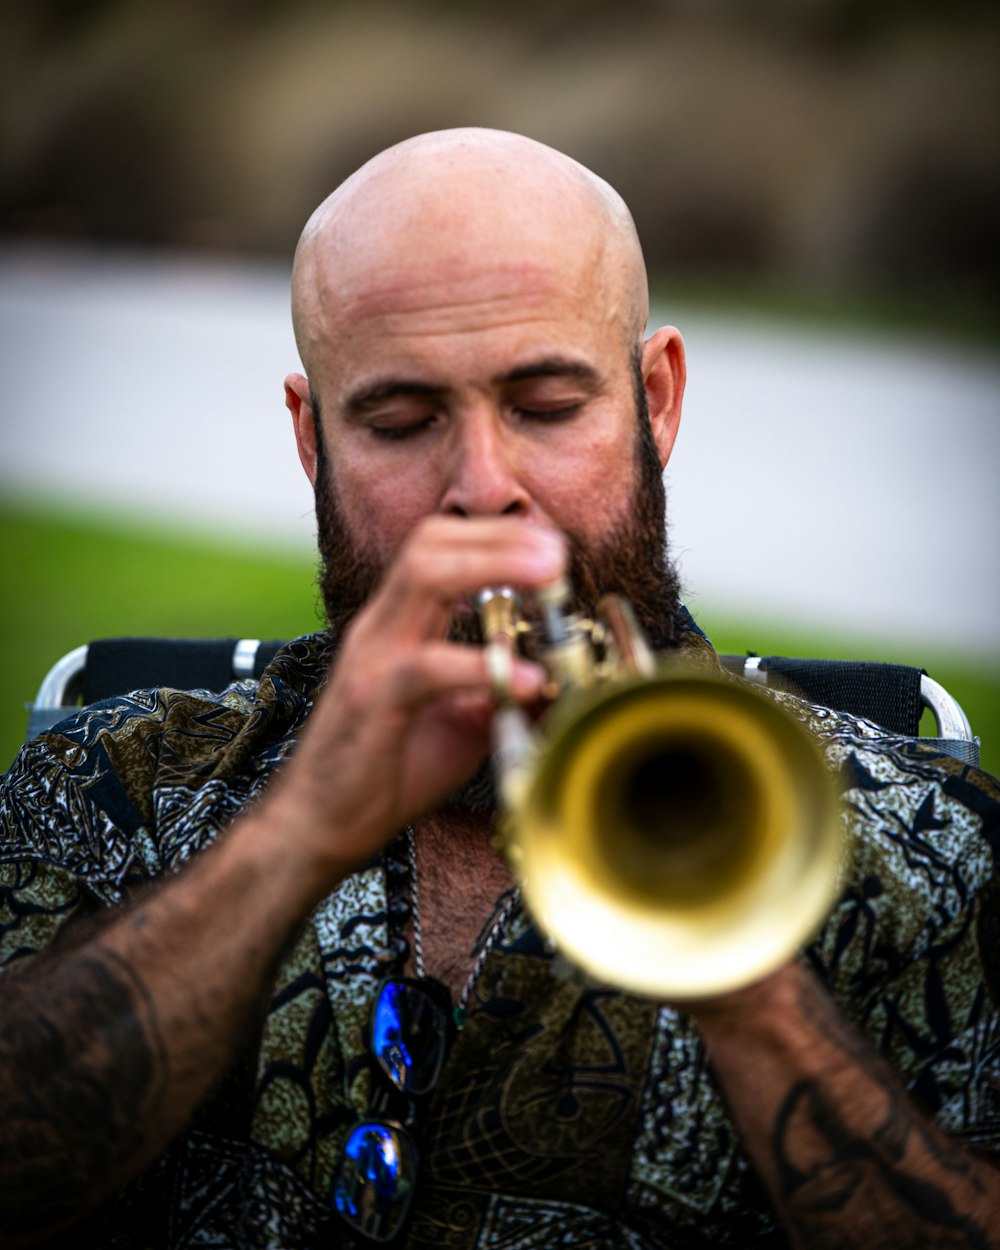 a man with a bald head playing a trumpet